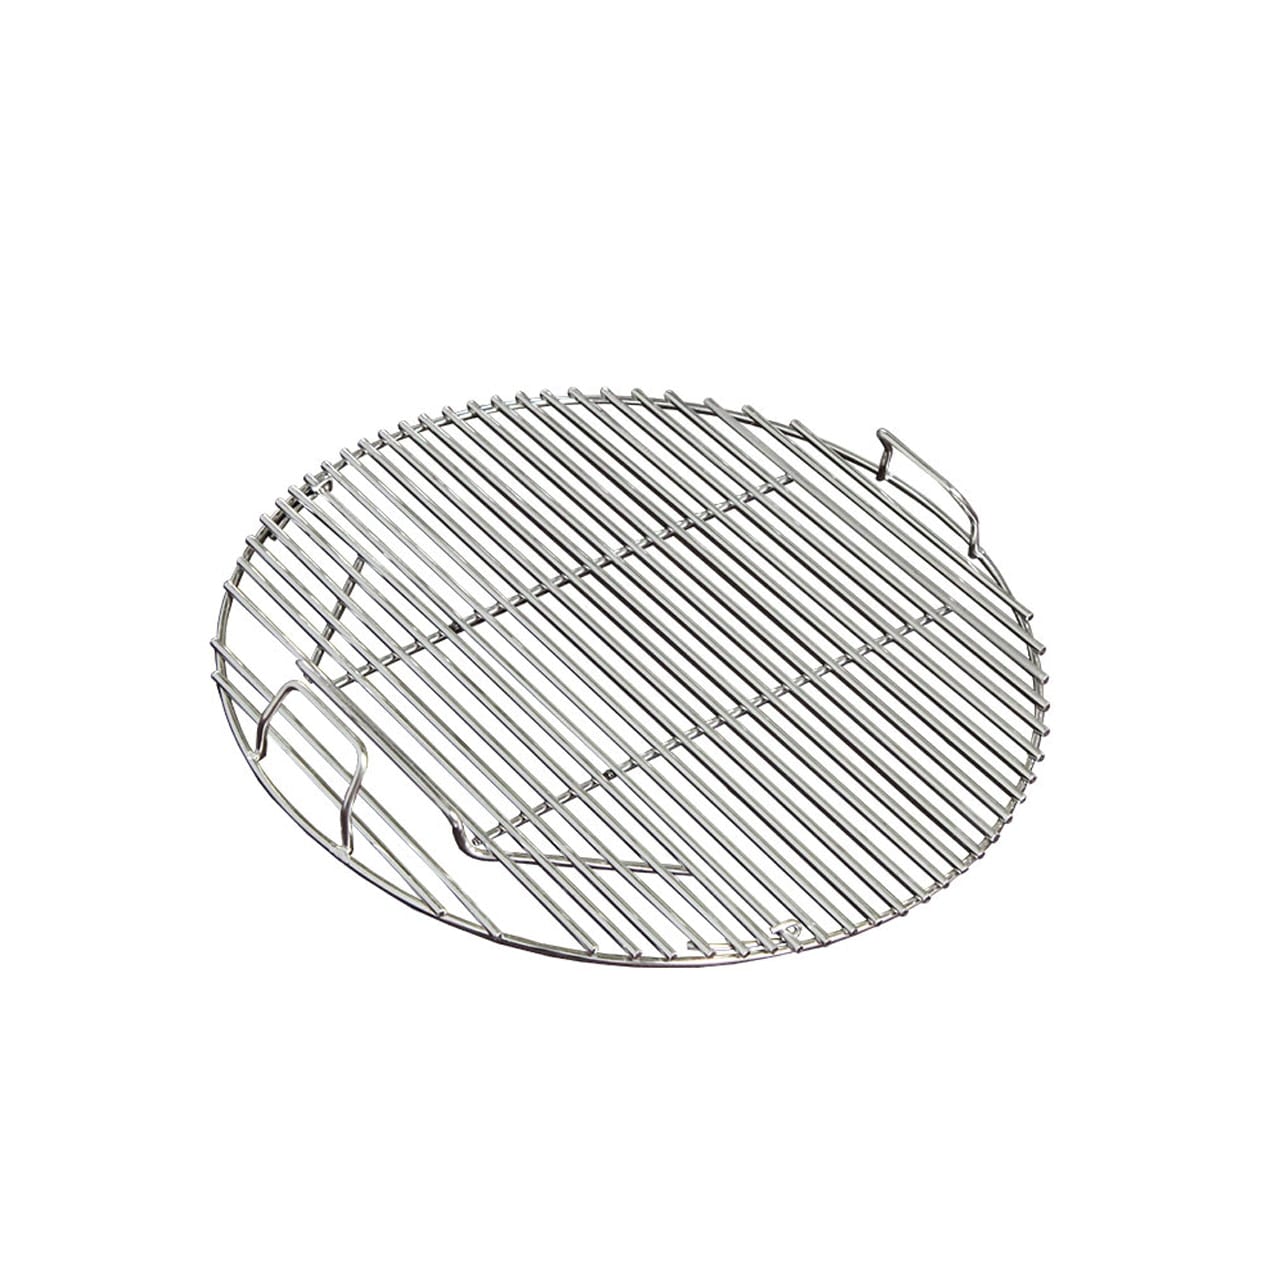 Large Cooking Grate Bottom